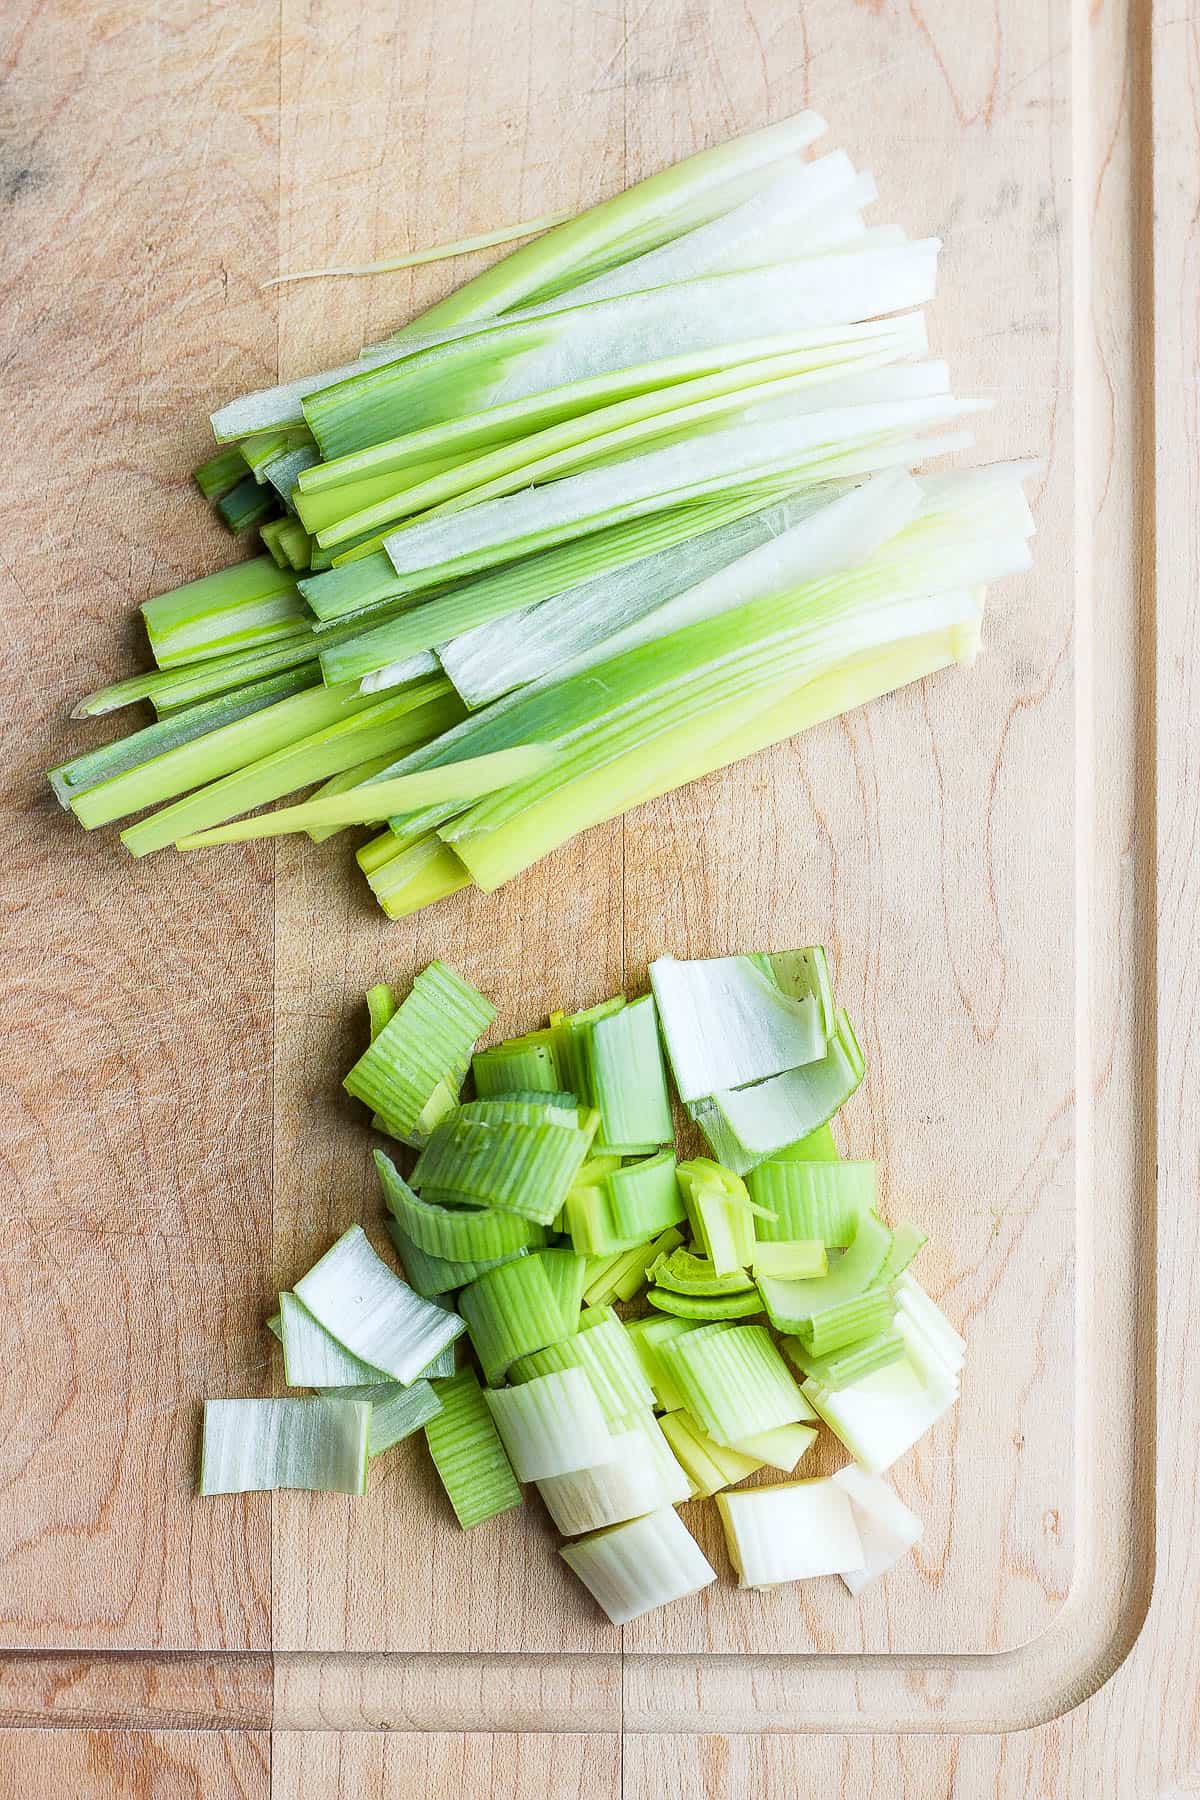 Two types of cuts of leeks